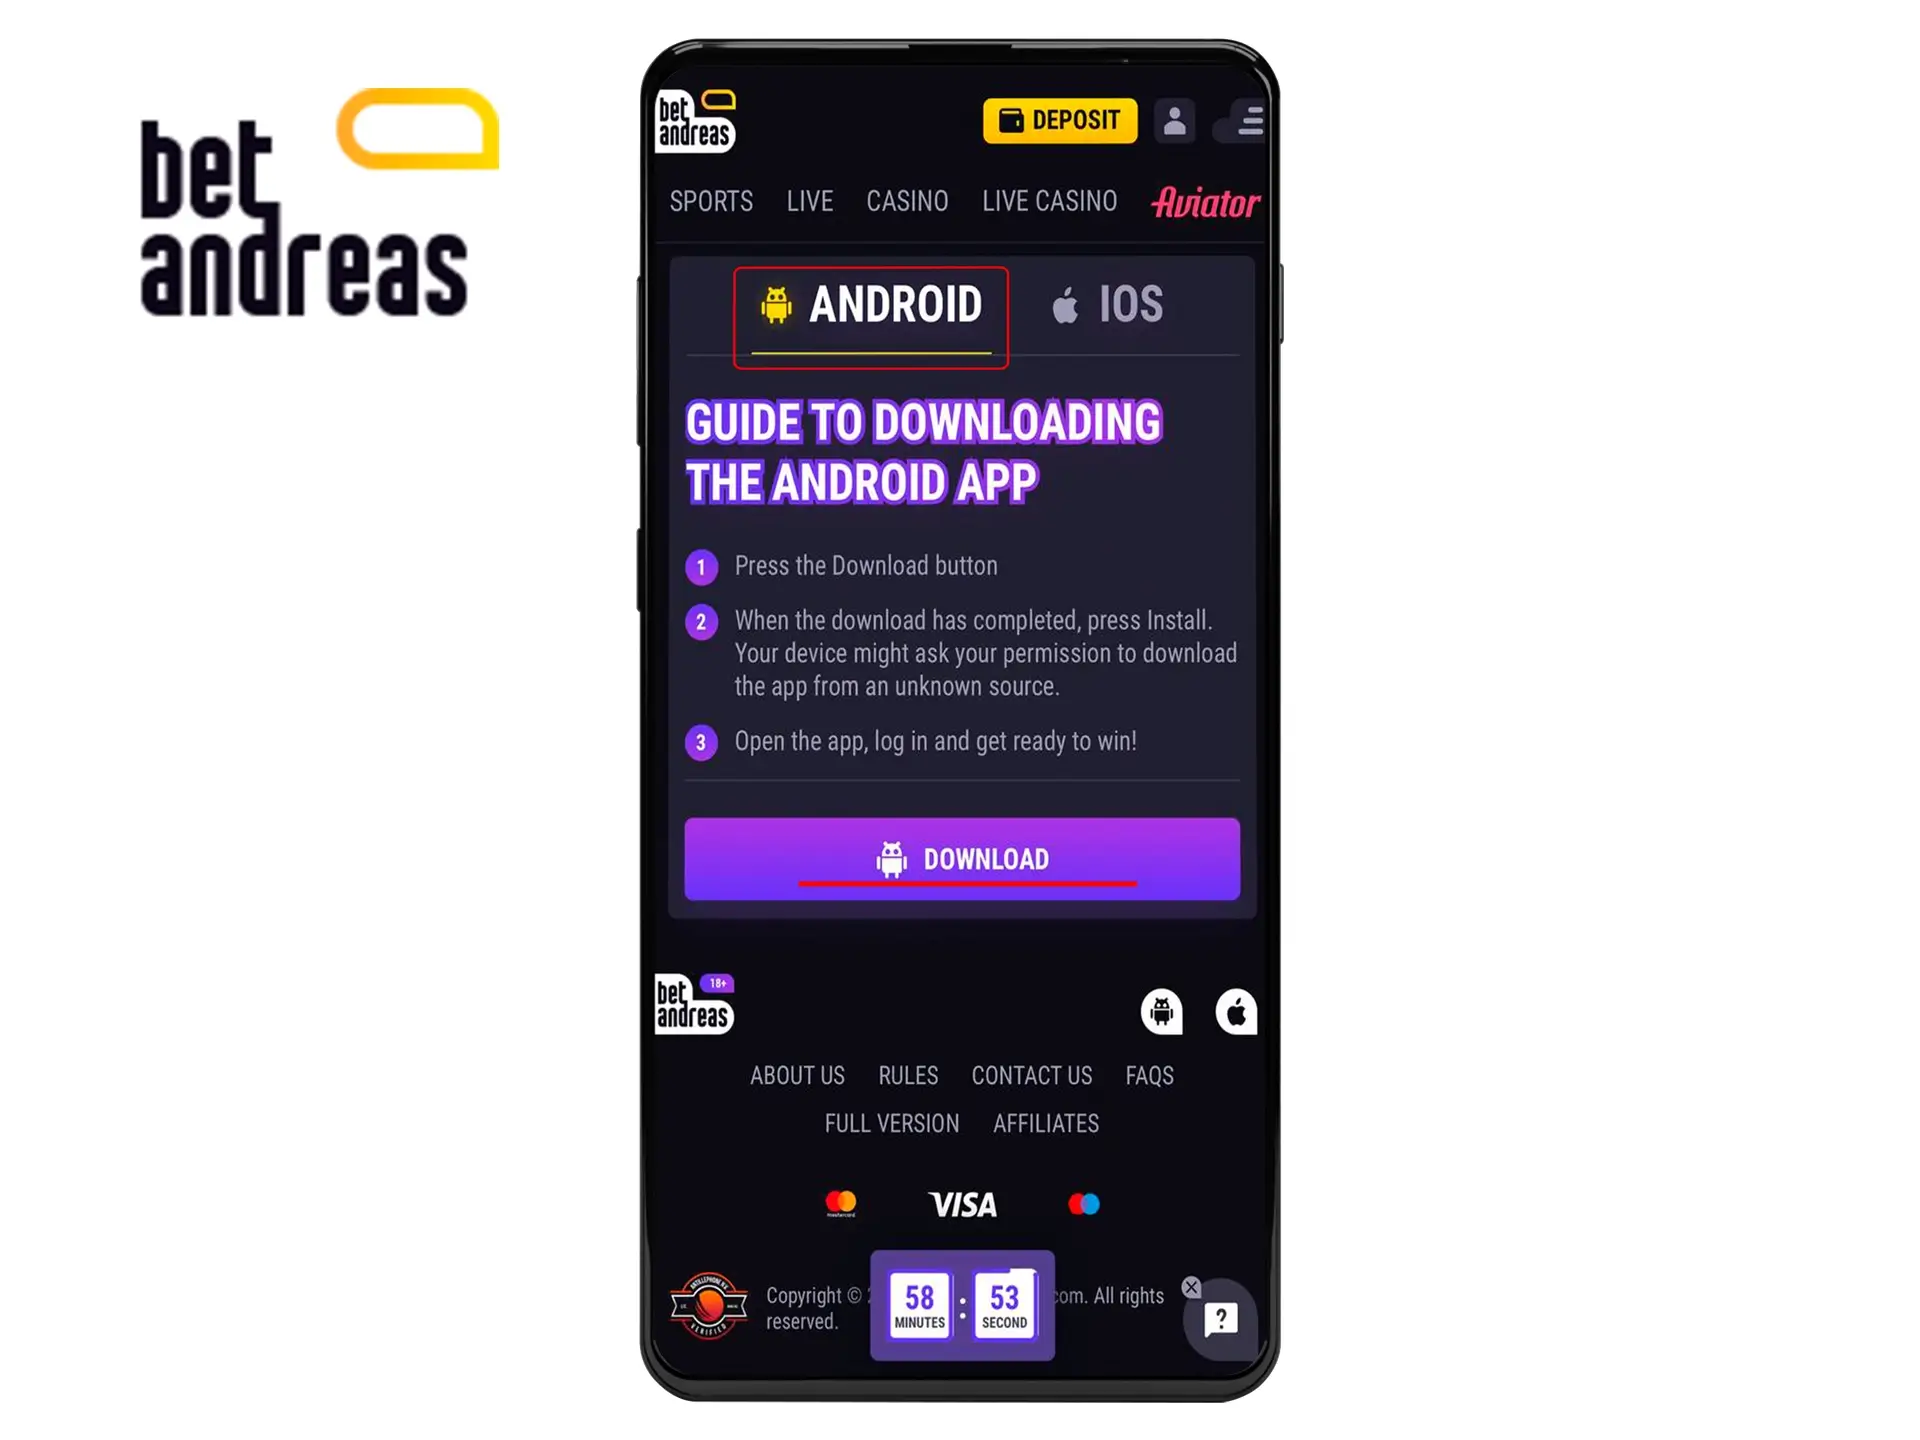 Click on the Android logo on the BetAndreas website and start installing the app on your device.